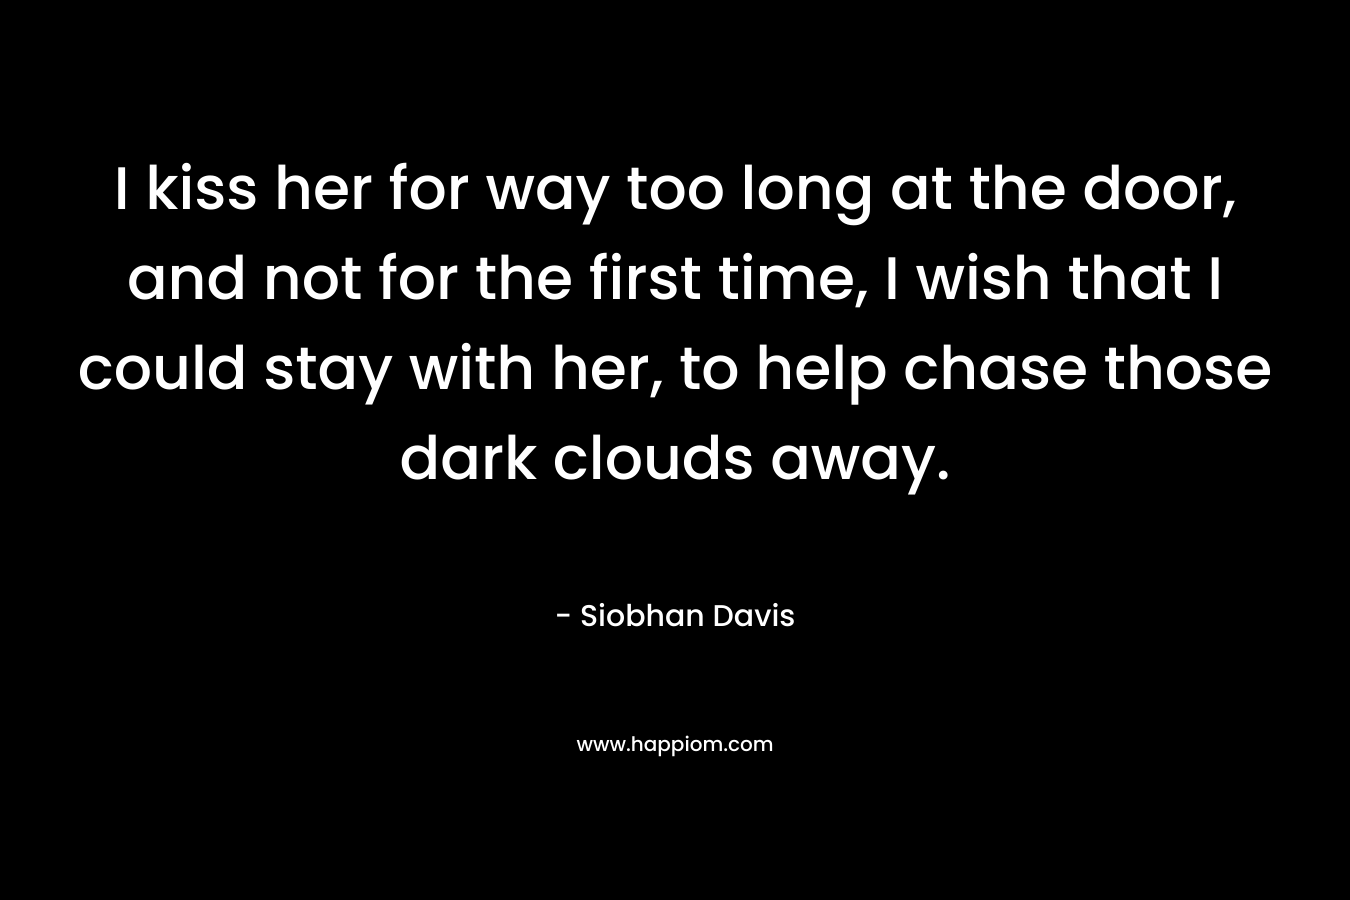 I kiss her for way too long at the door, and not for the first time, I wish that I could stay with her, to help chase those dark clouds away.